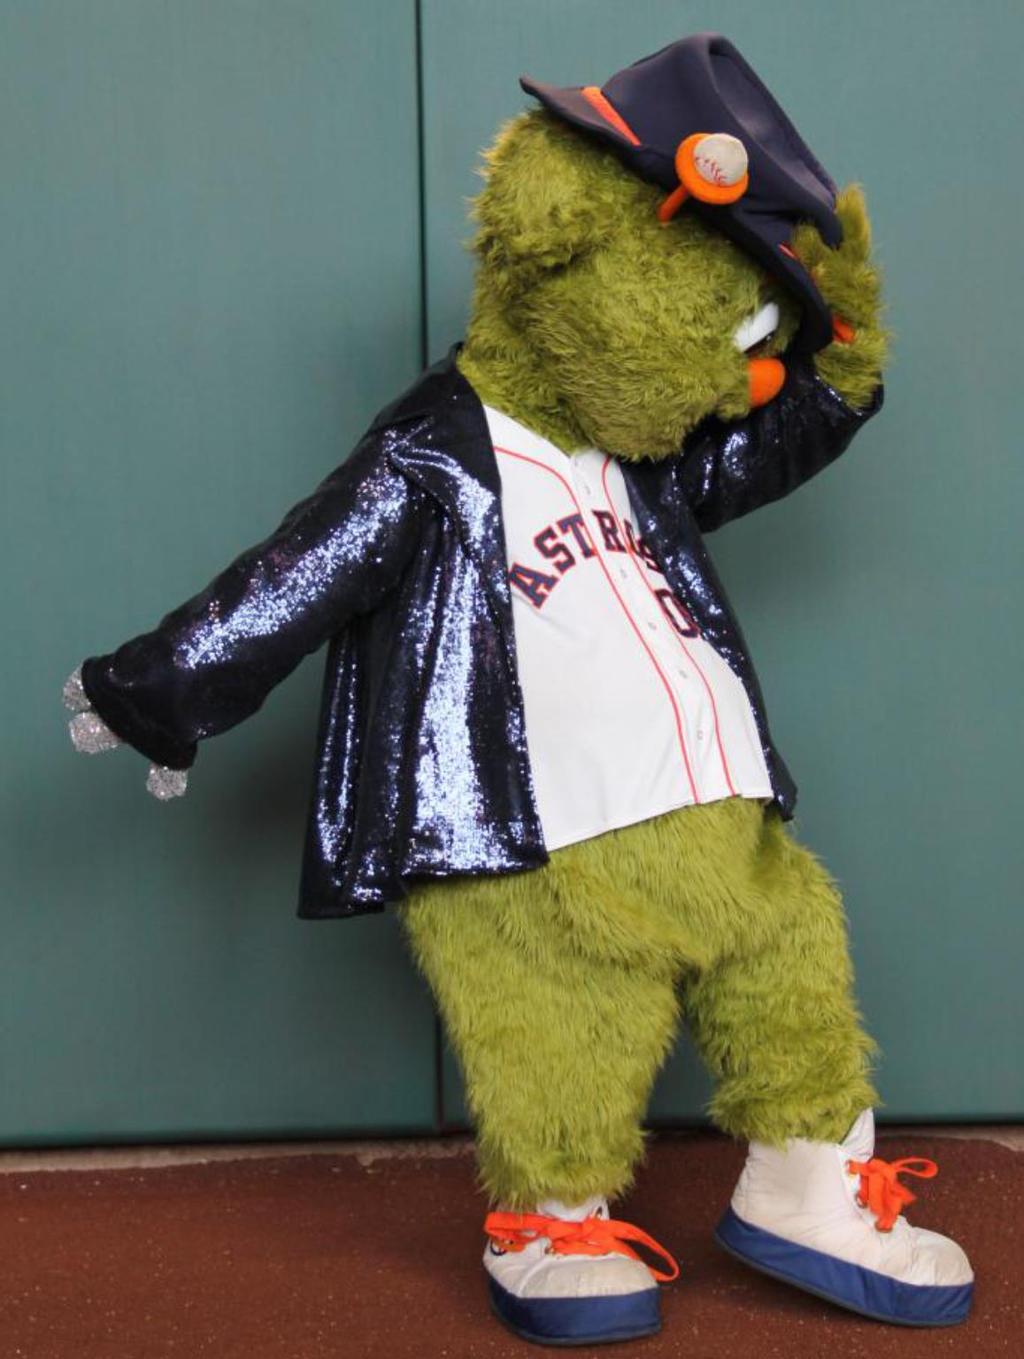 THE ASTROS FOUNDATION PRESENTS DANCING WITH THE STROS We know they have the stuff to make it in the Big Leagues but now it s time to see what they can bring to the dance floor.